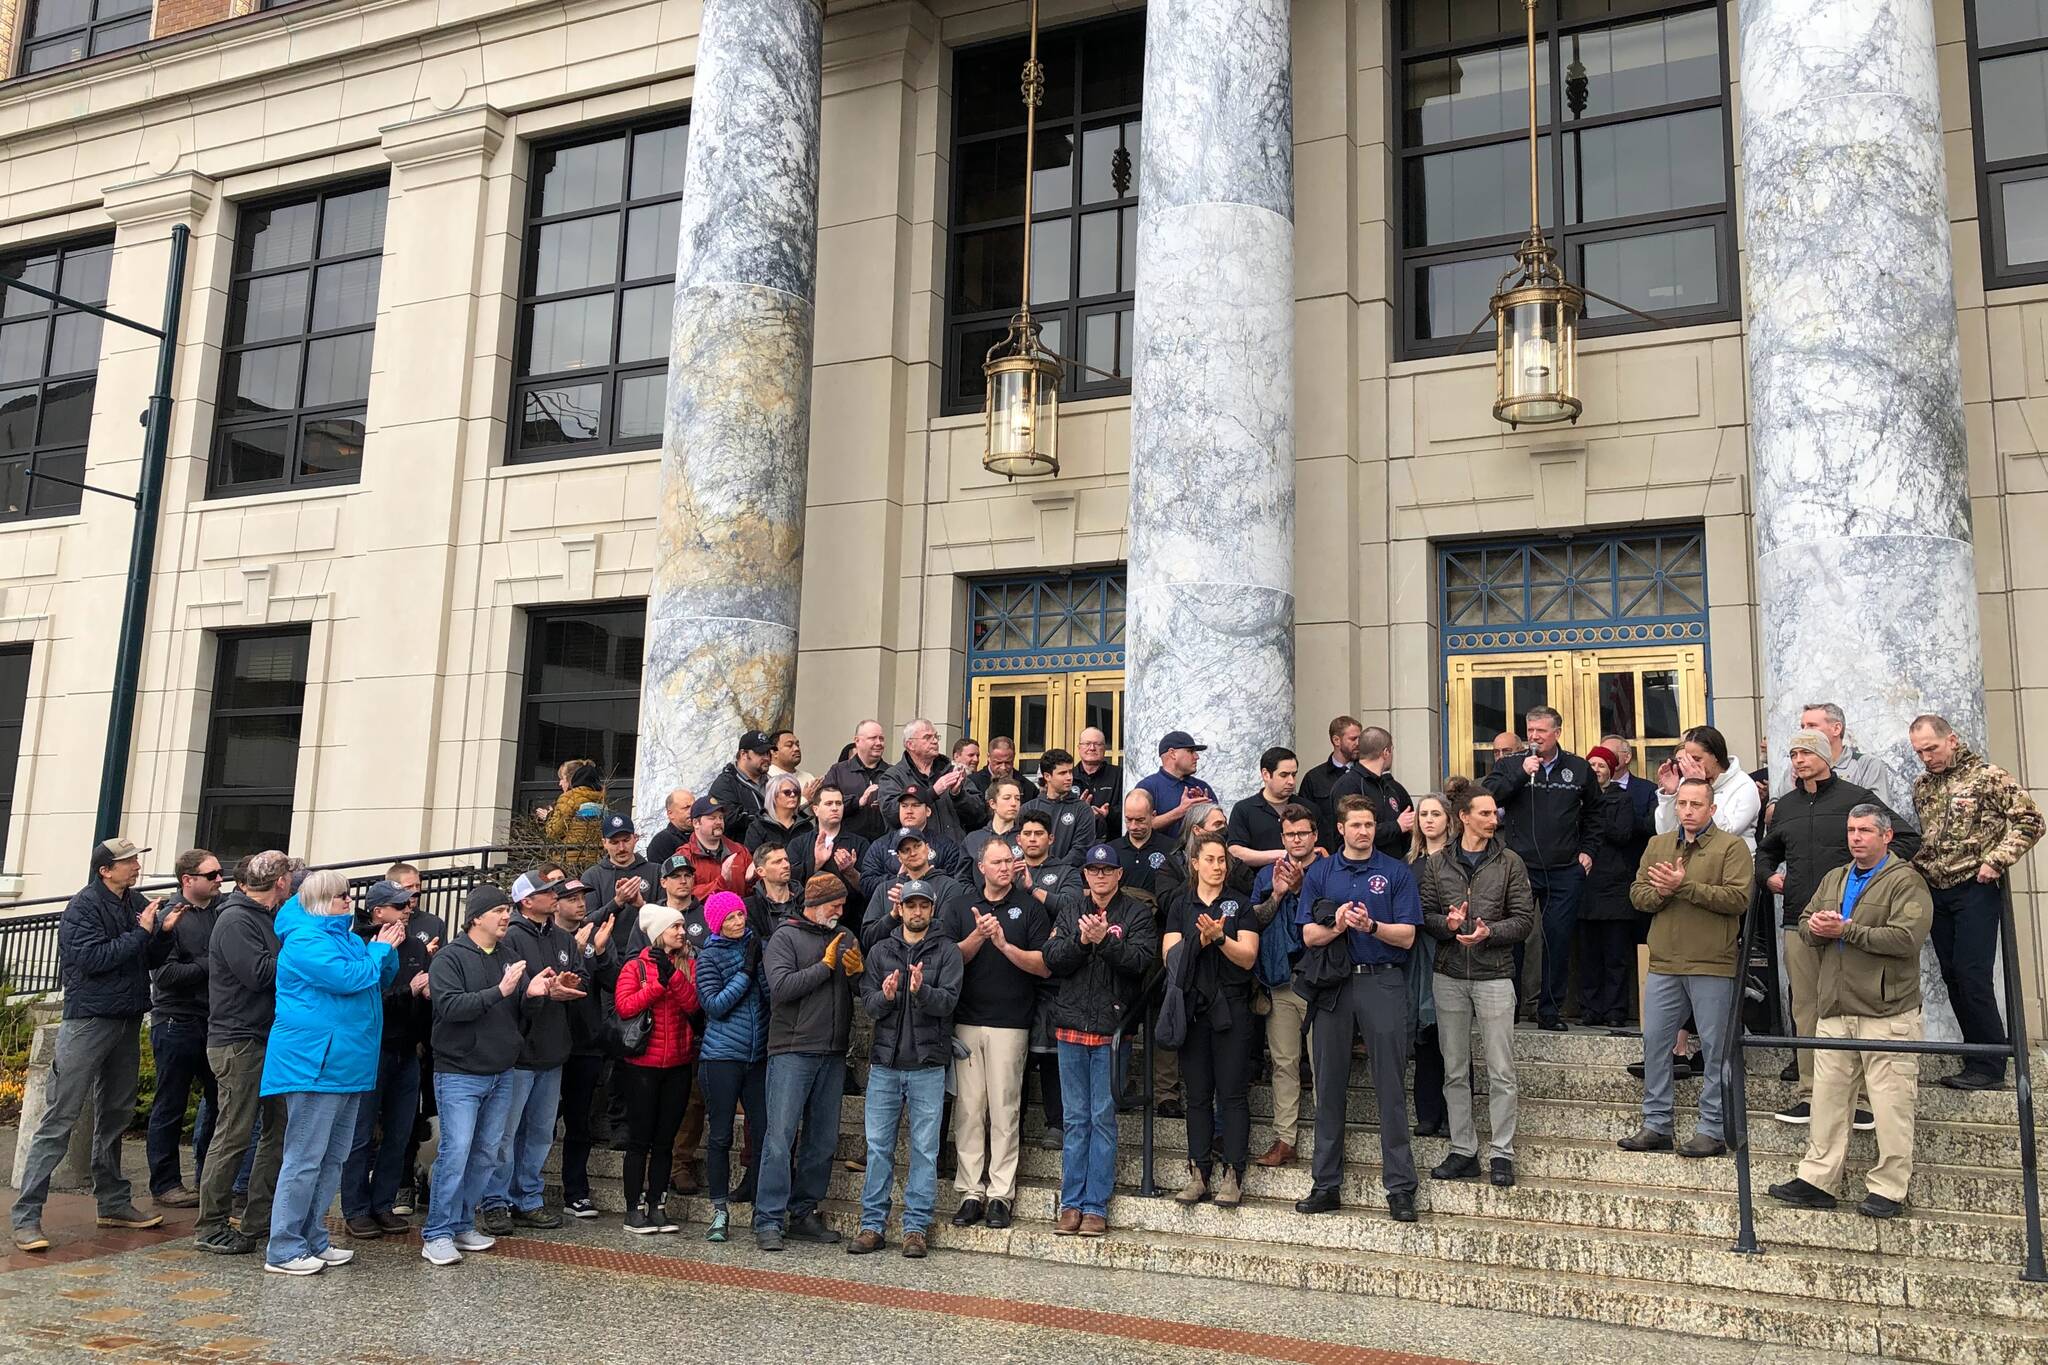 Peter Segall / Juneau Empire
State and municipal public safety employees gathered on the steps of the Alaska State Capitol on Thursday, March 31, 2022, to urge senators to act on a bill to rework the state’s pension system for police, firefighters and other public safety employees.